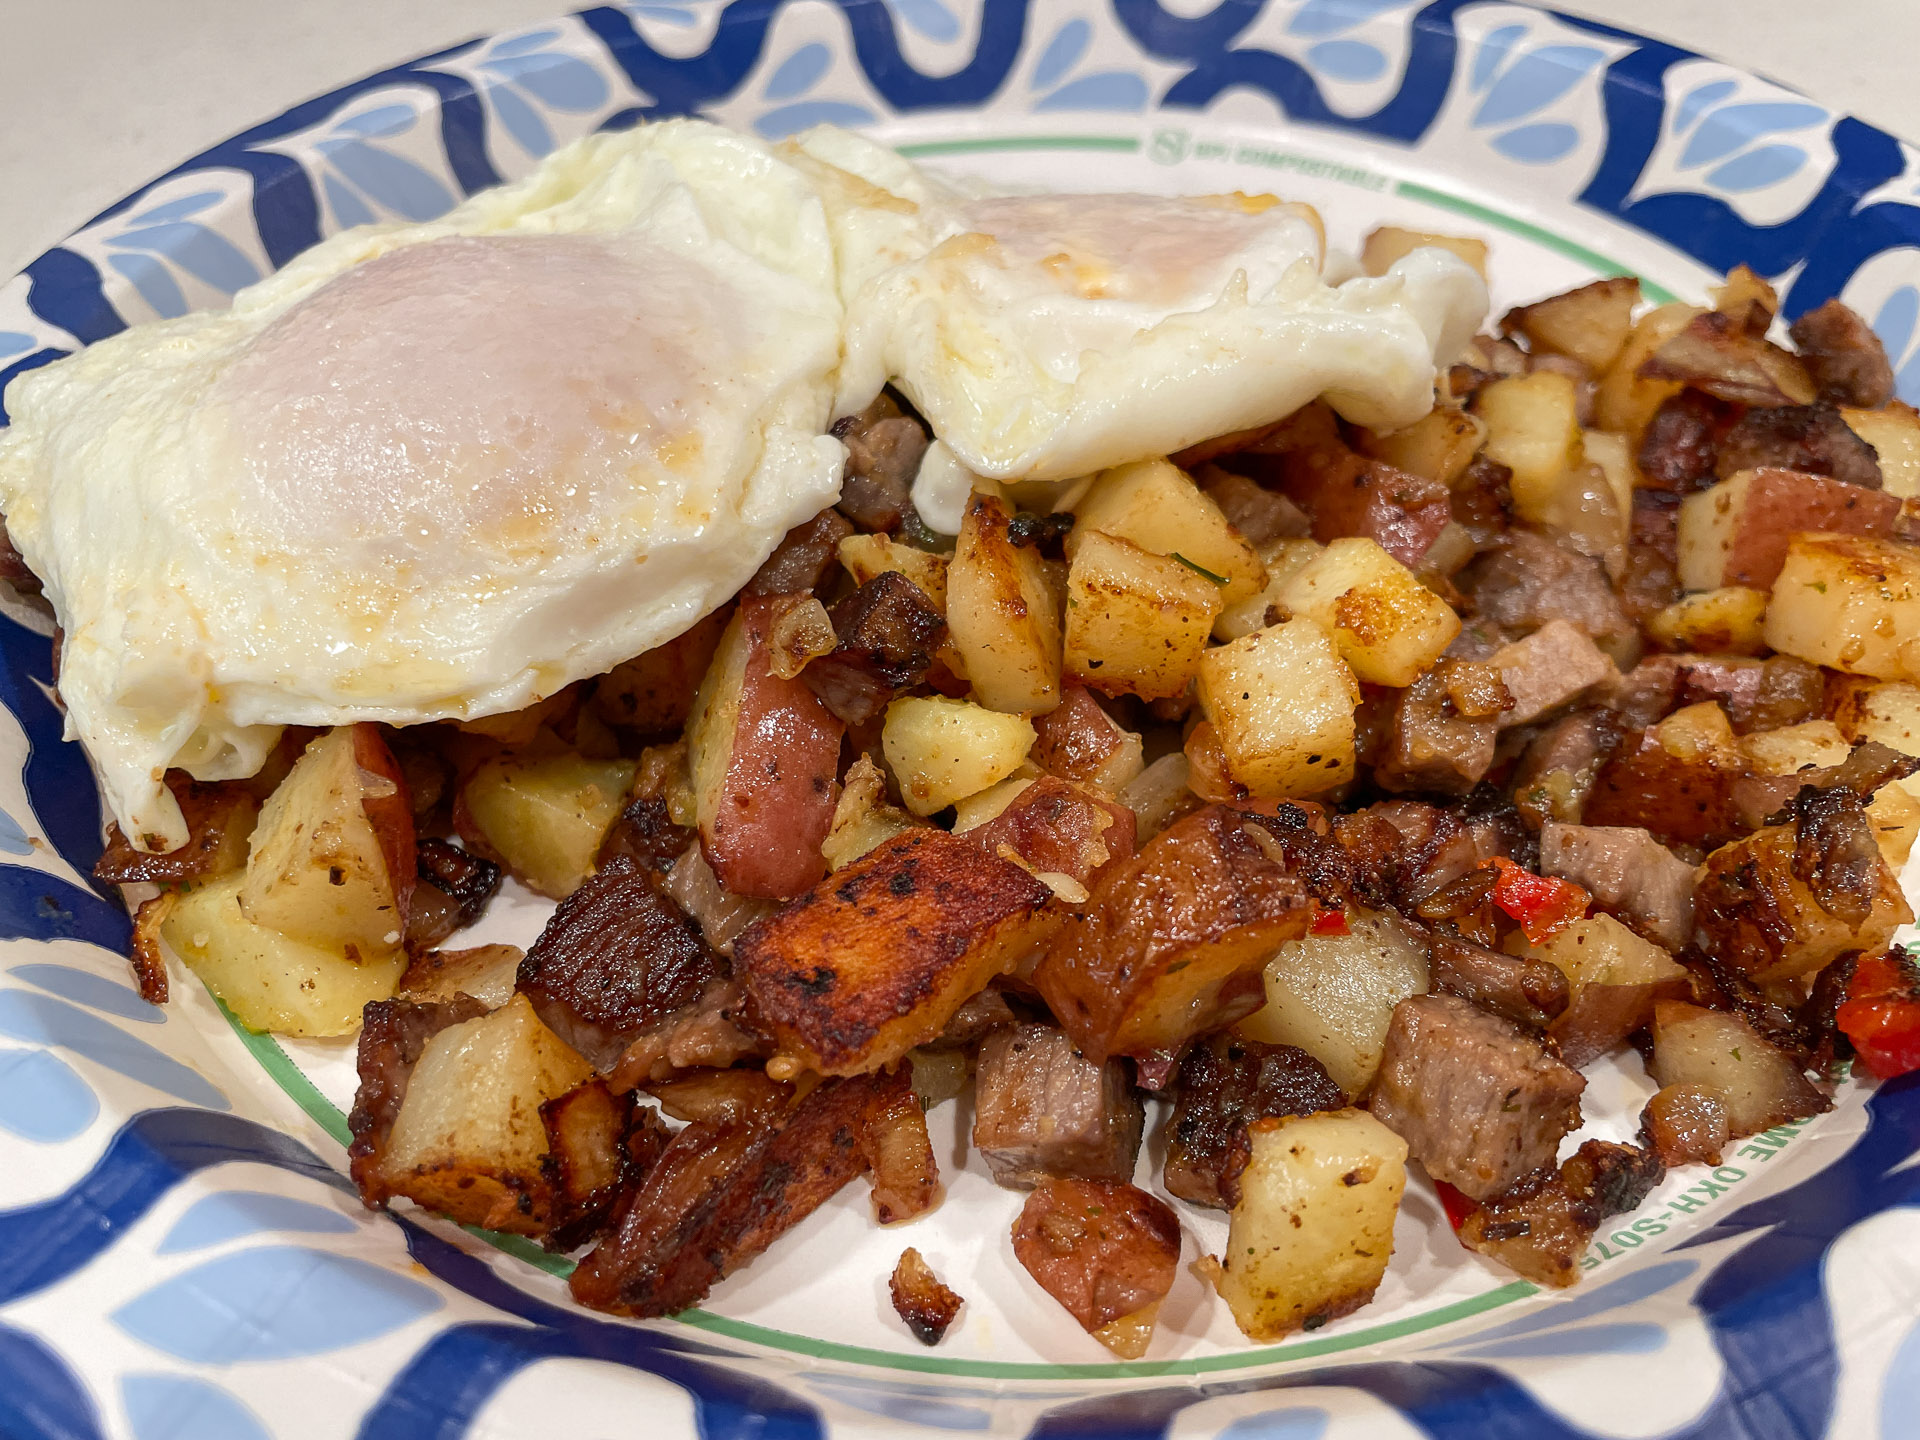 Fried Potatoes with Eggs on Top